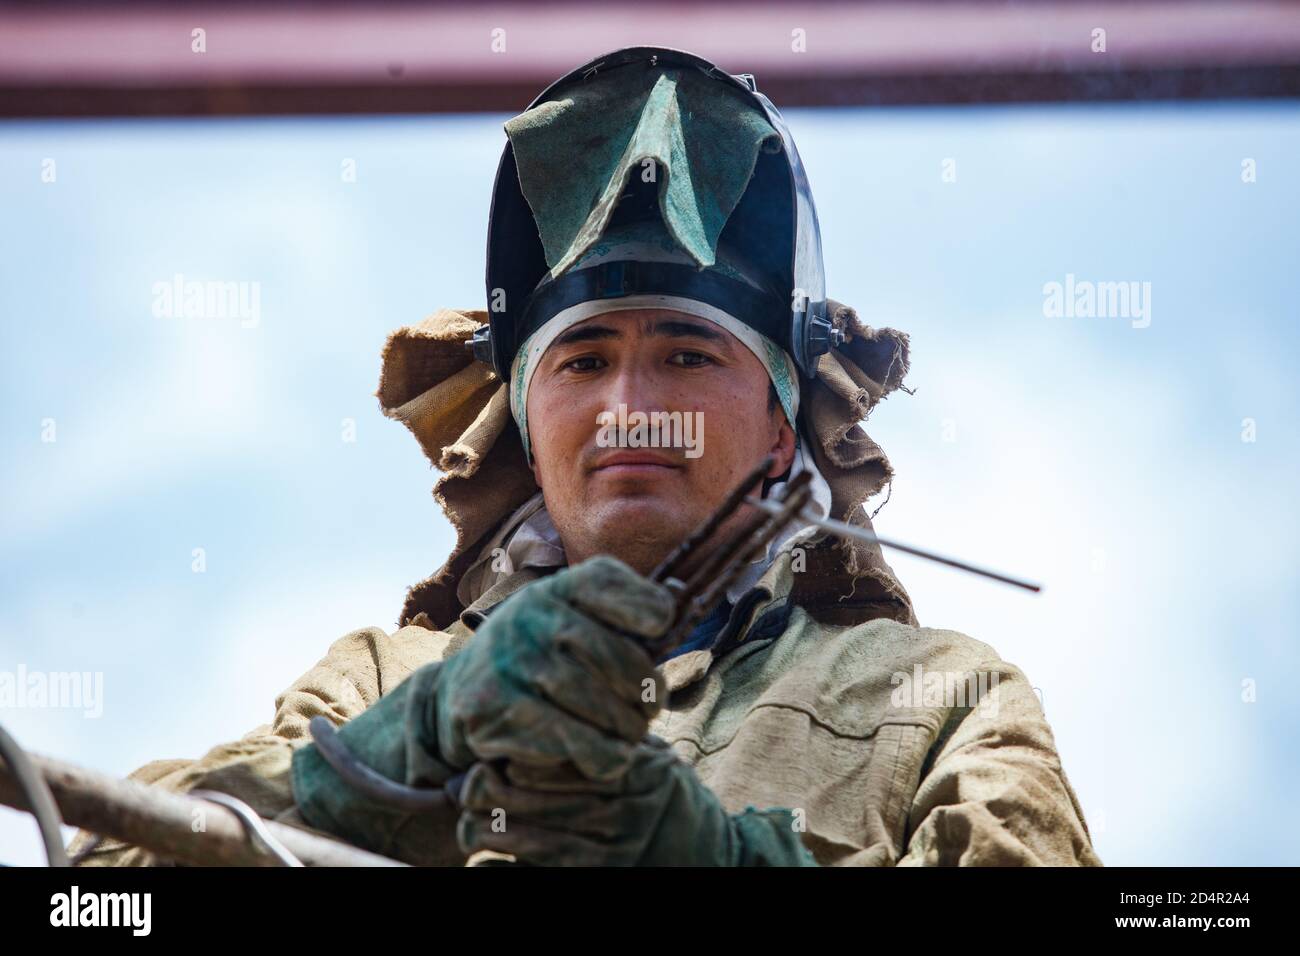 Shymkent/Kazakhstan - April 27 2012: Construction of new industrial building of chemical pharmaceutical plant Santo. Welder worker at work. Stock Photo